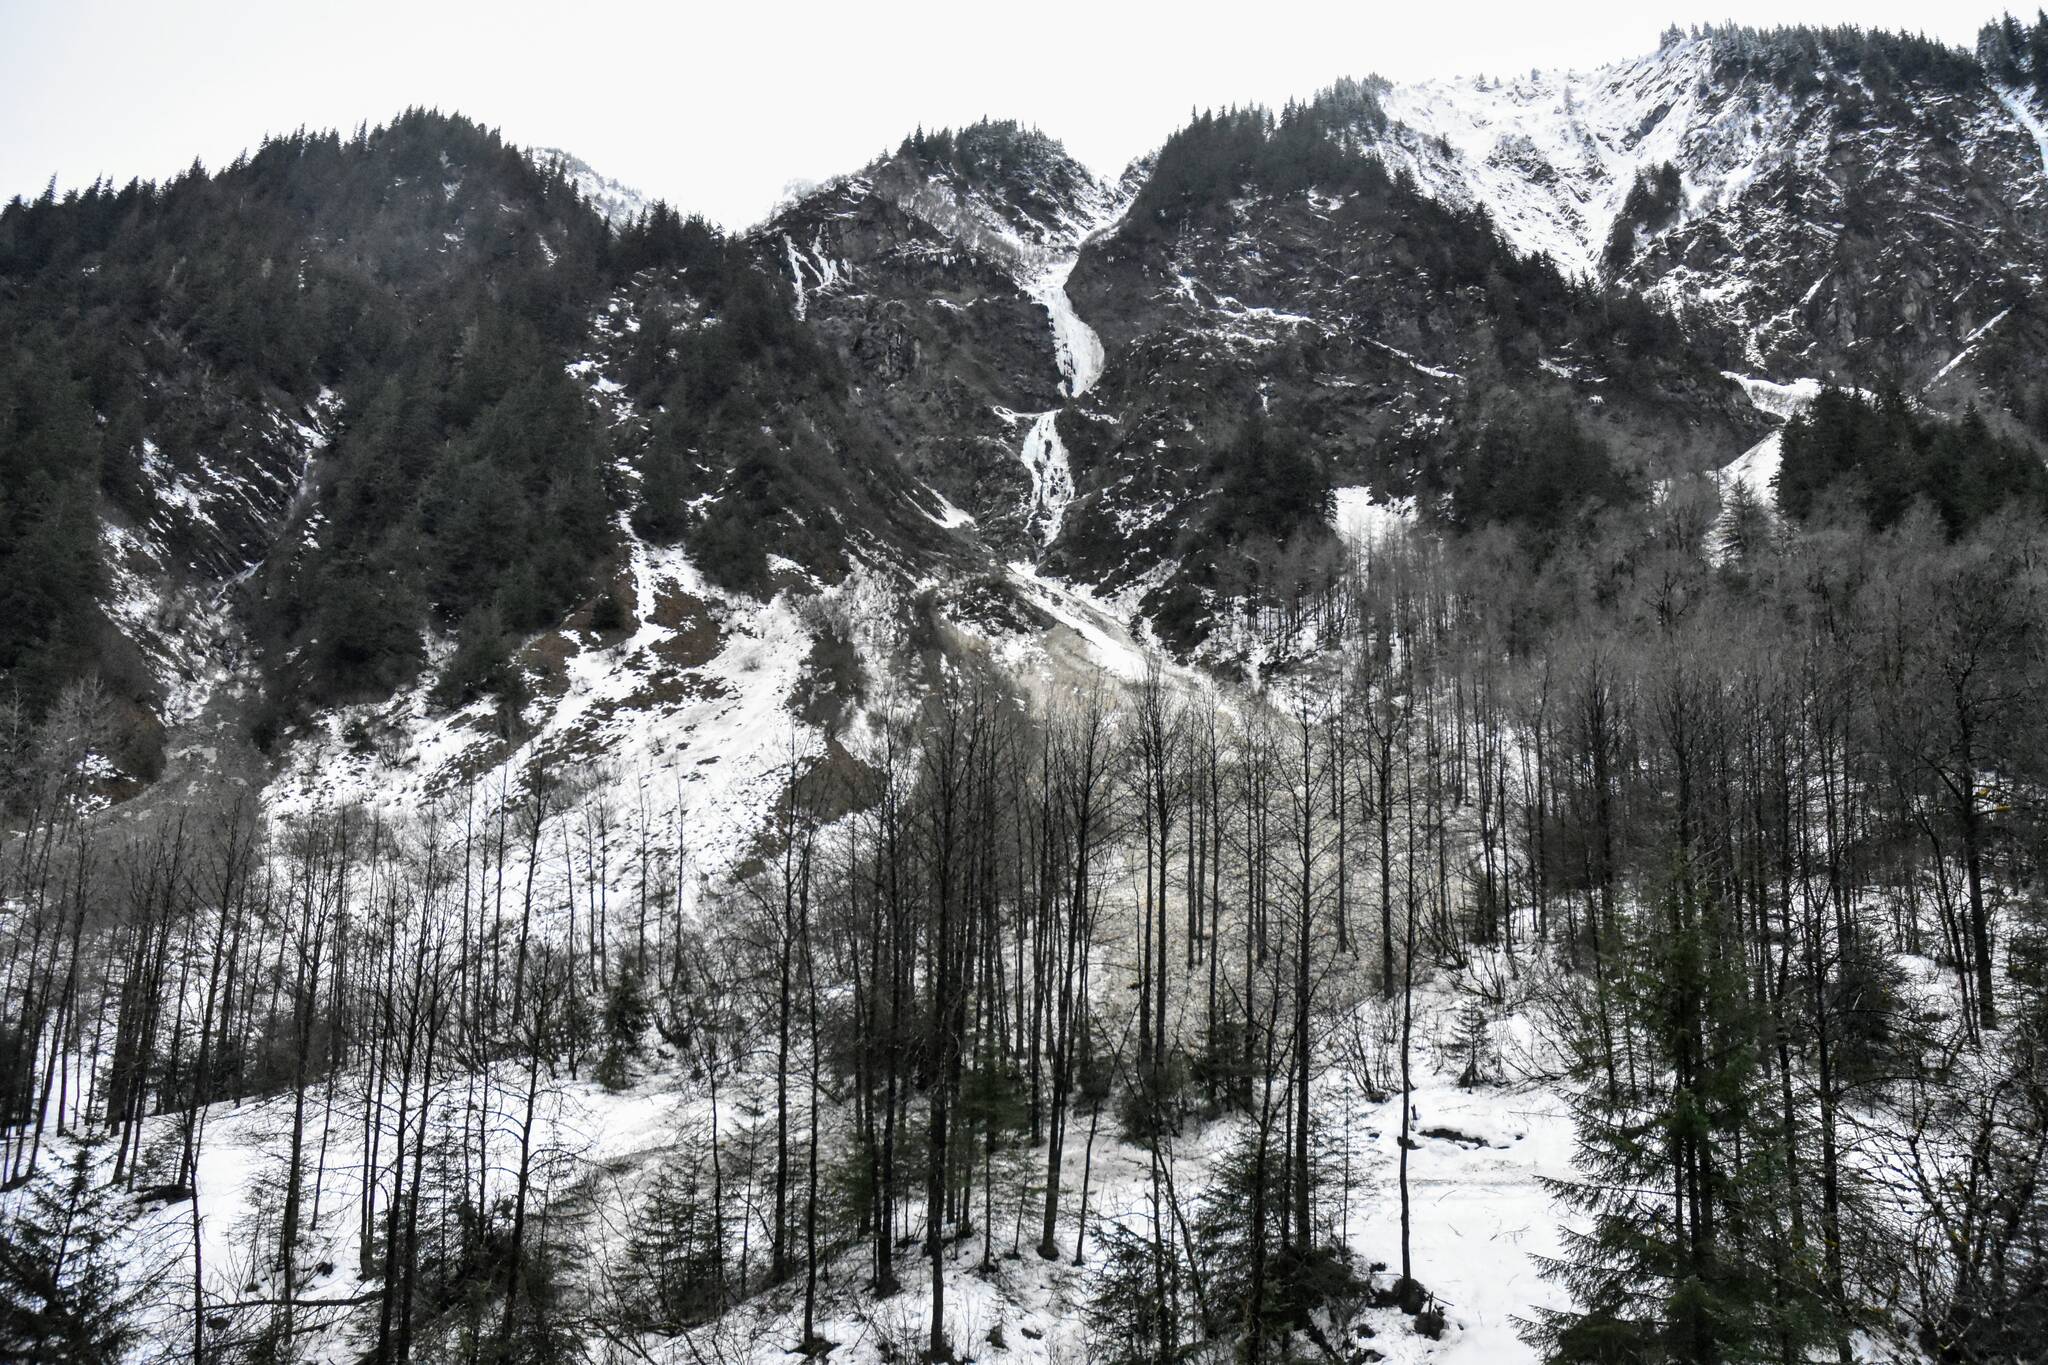 An avalanche above Basin Road covered the Gold Creek Flume Trail on Monday, Jan. 24, 2022, but didn't affect any structures. Heavy rains over the weekend set records in Juneau and caused several small avalanches in the region. (Peter Segall / Juneau Empire)